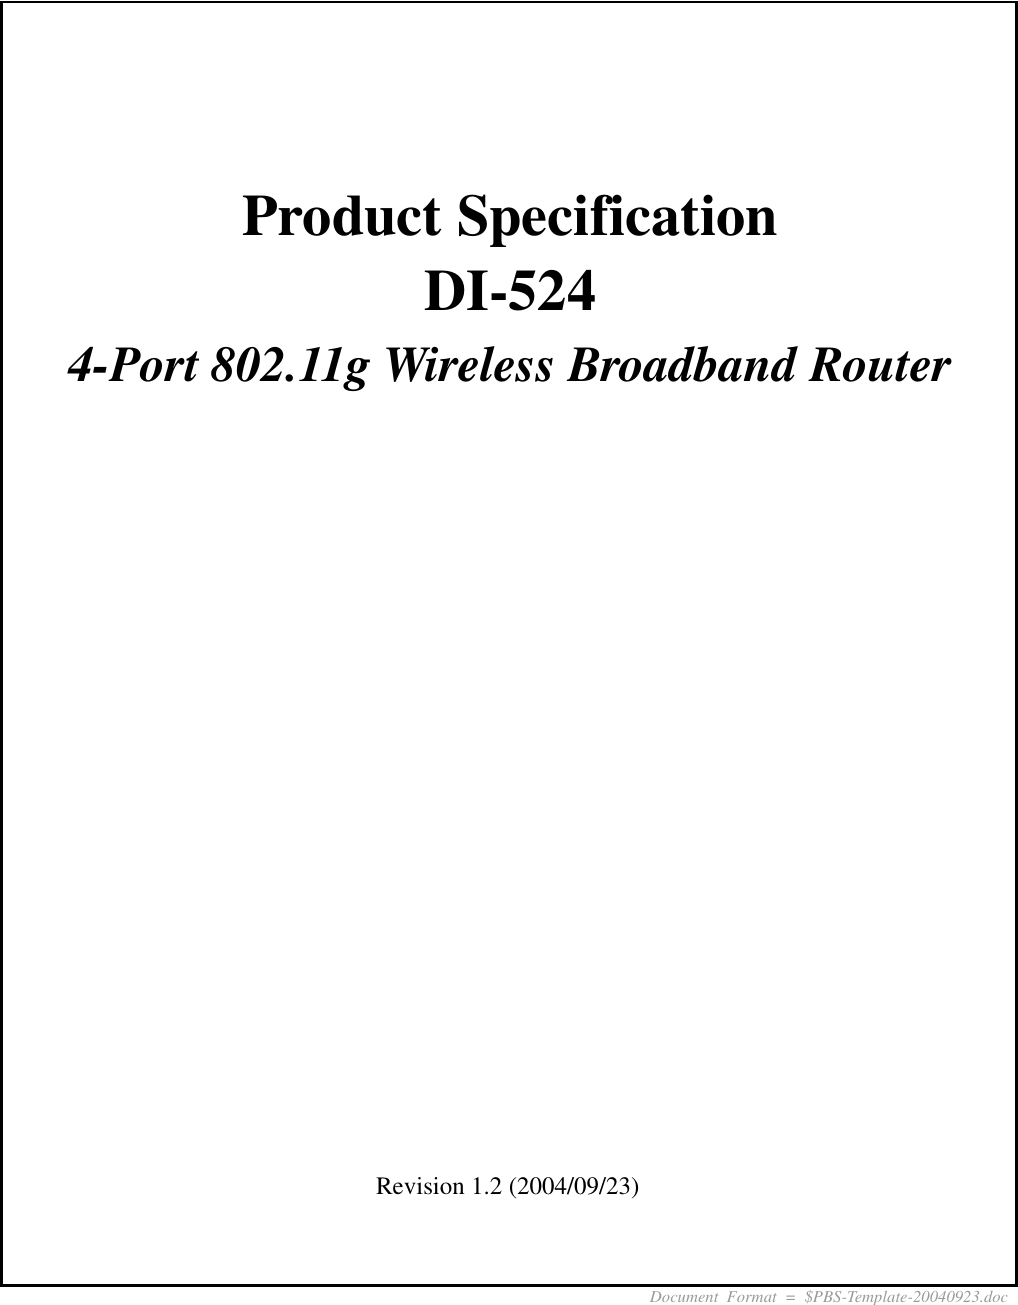      Revision 1.2 (2004/09/23) Document Format = $PBS-Template-20040923.doc    Product Specification DI-524 4-Port 802.11g Wireless Broadband Router 